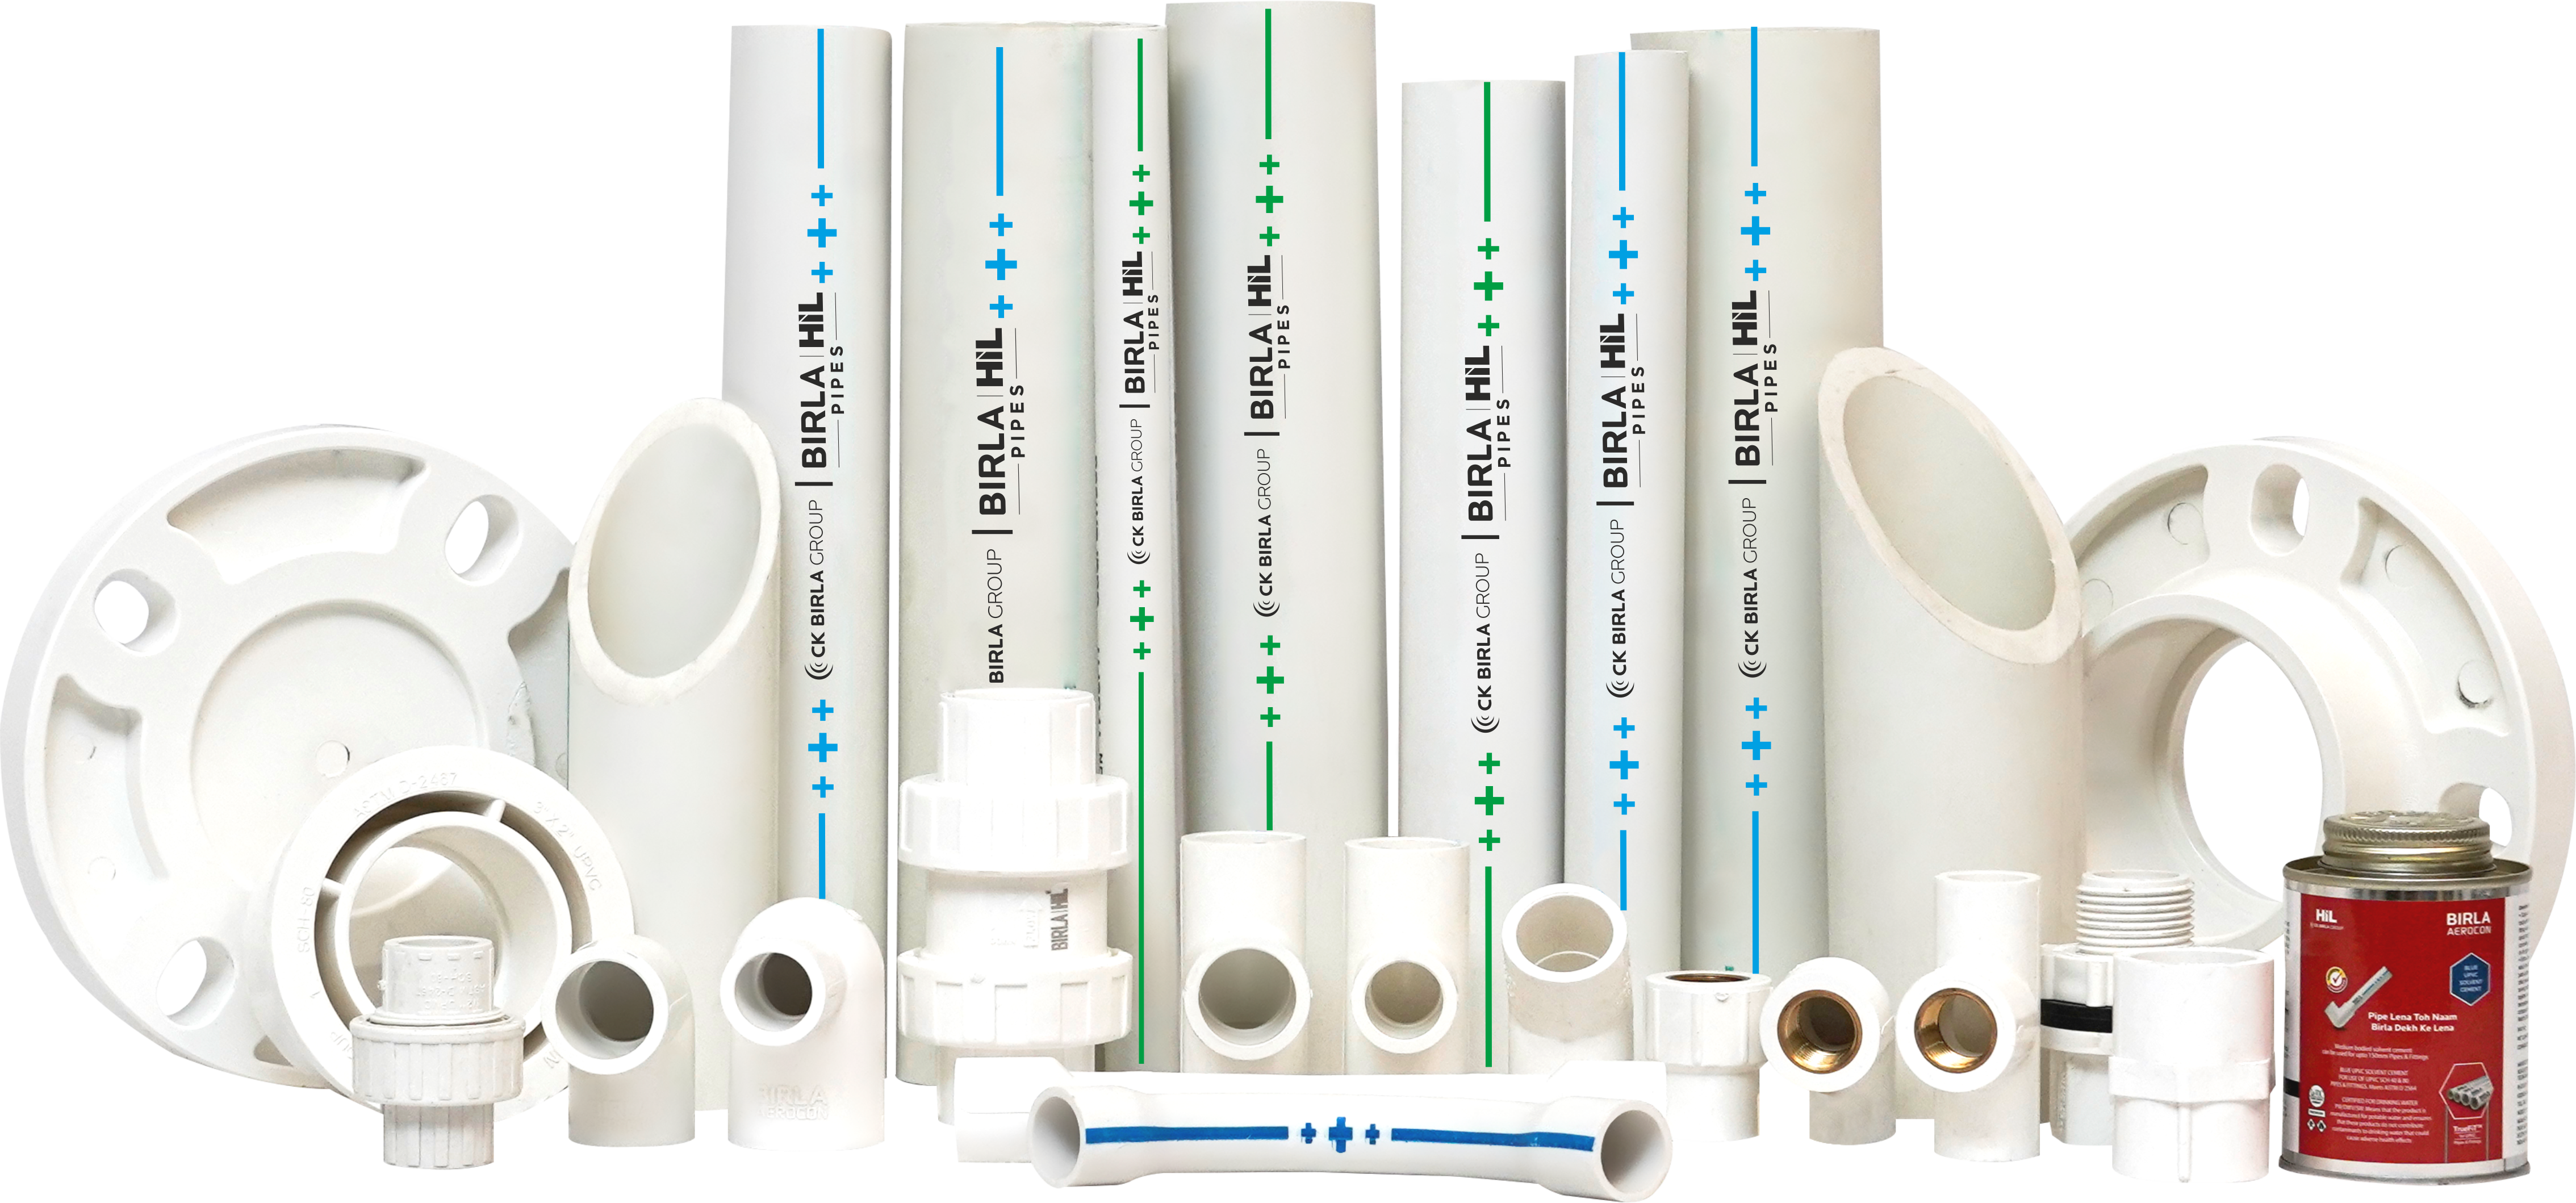 uPVC Pipes and Fittings